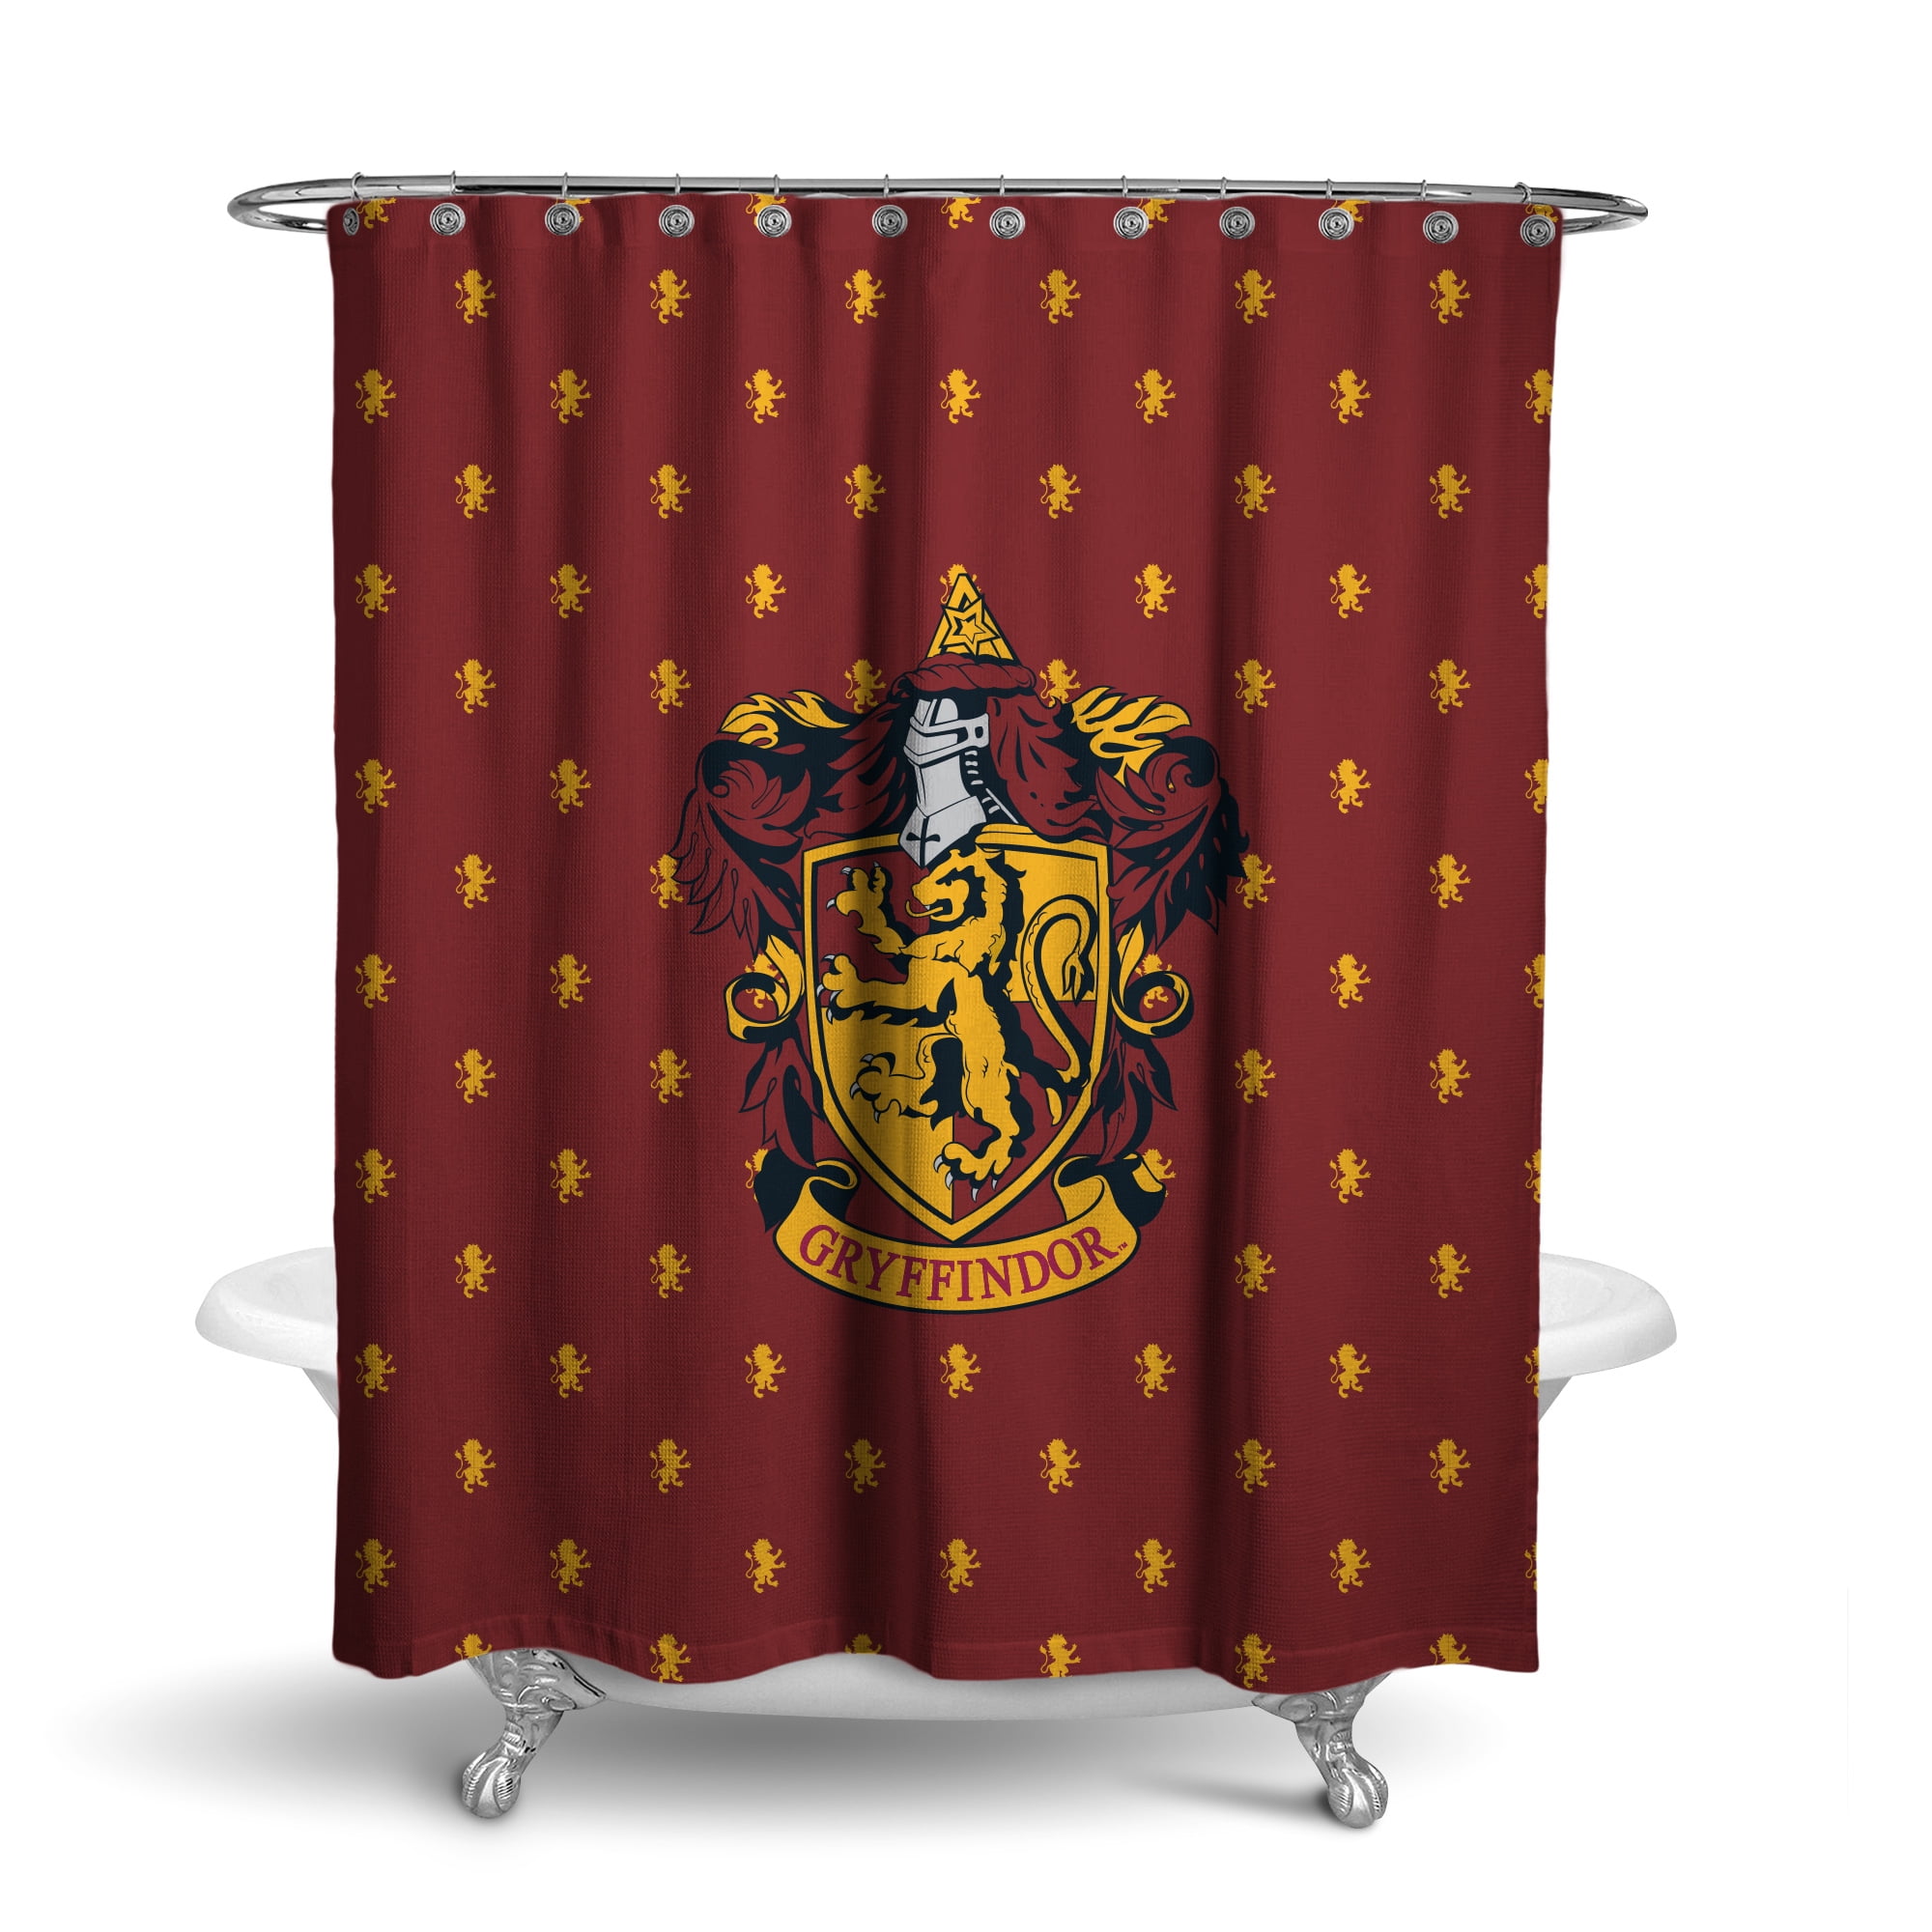 Harry Potter silhouette shower curtain custom by Nancicurtain